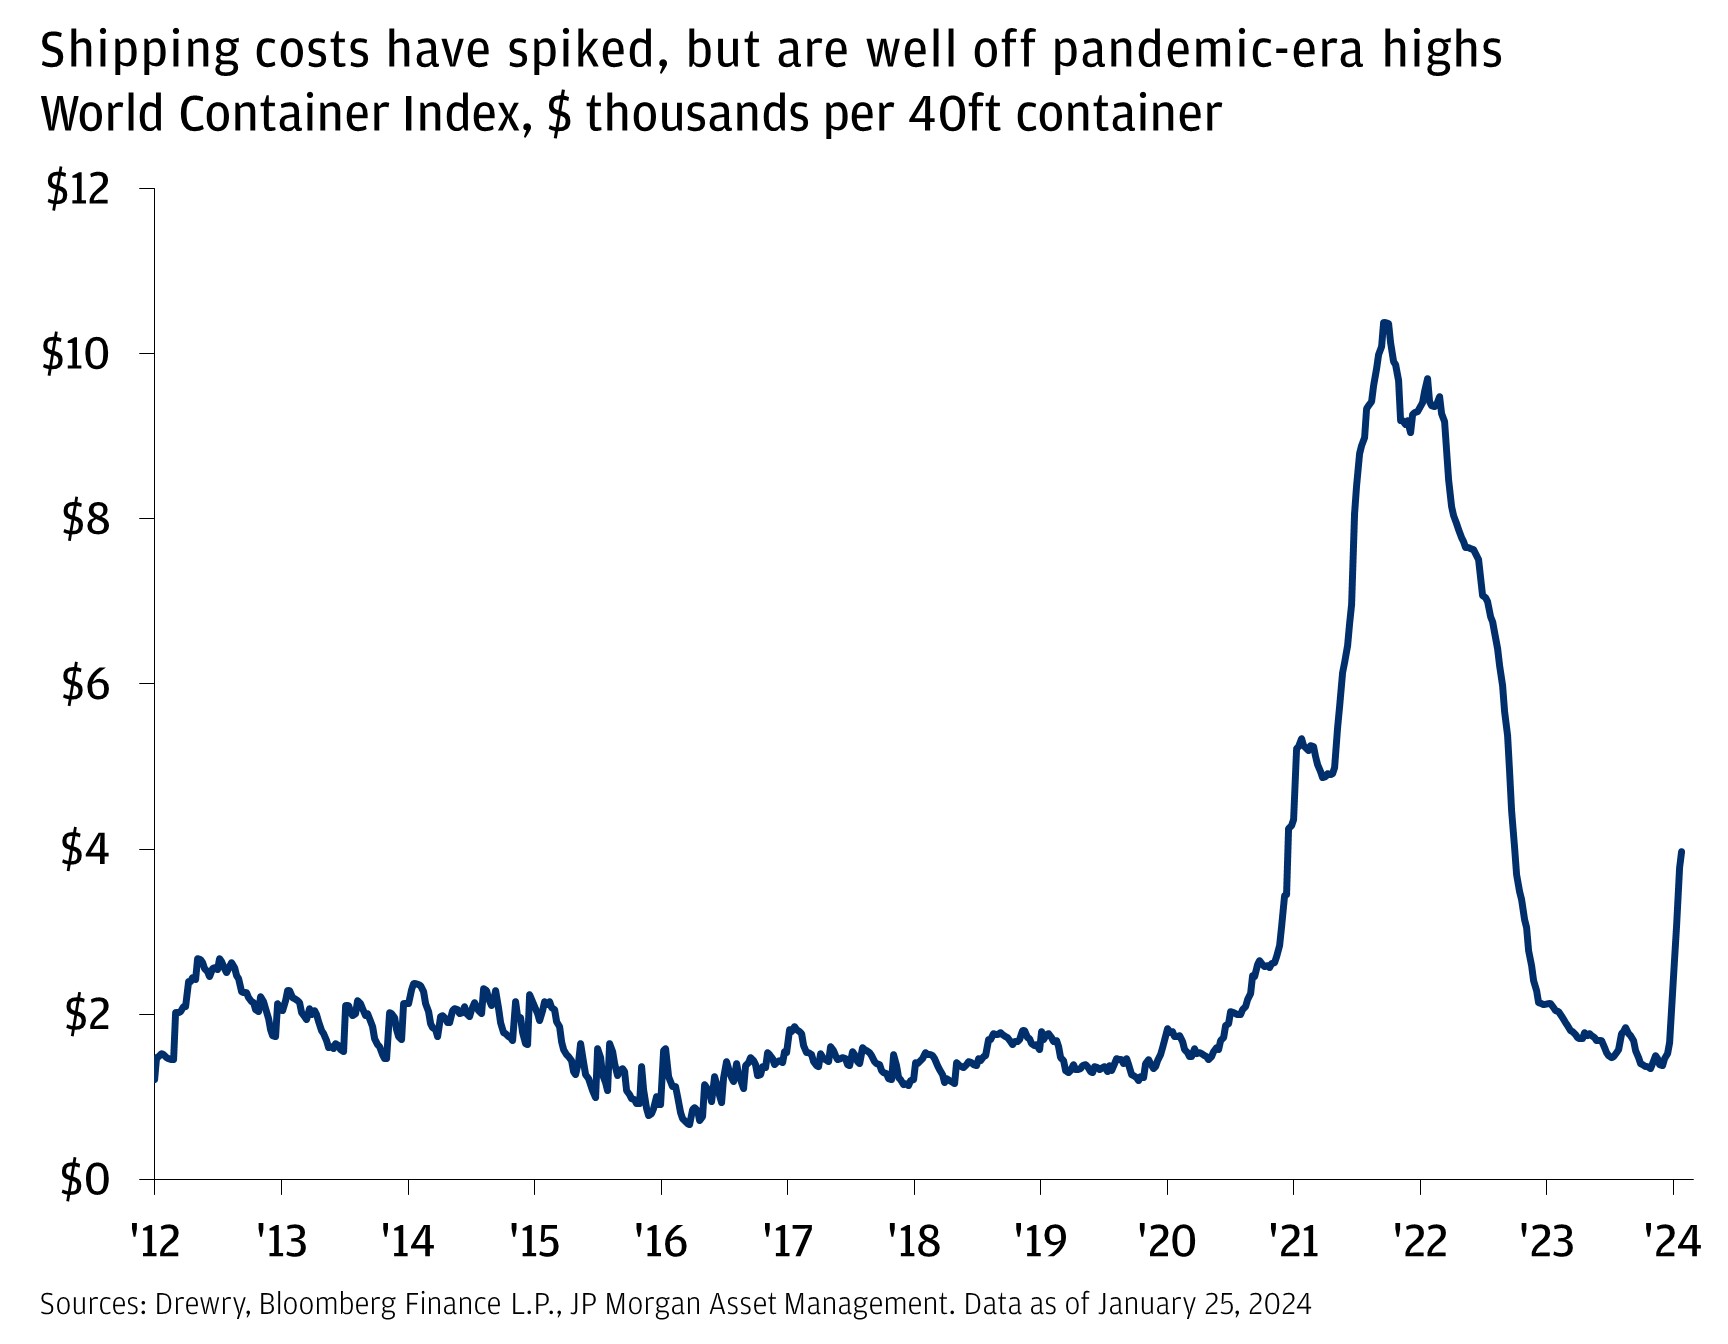 Shipping costs have spiked, but are well off pandemic-era highs